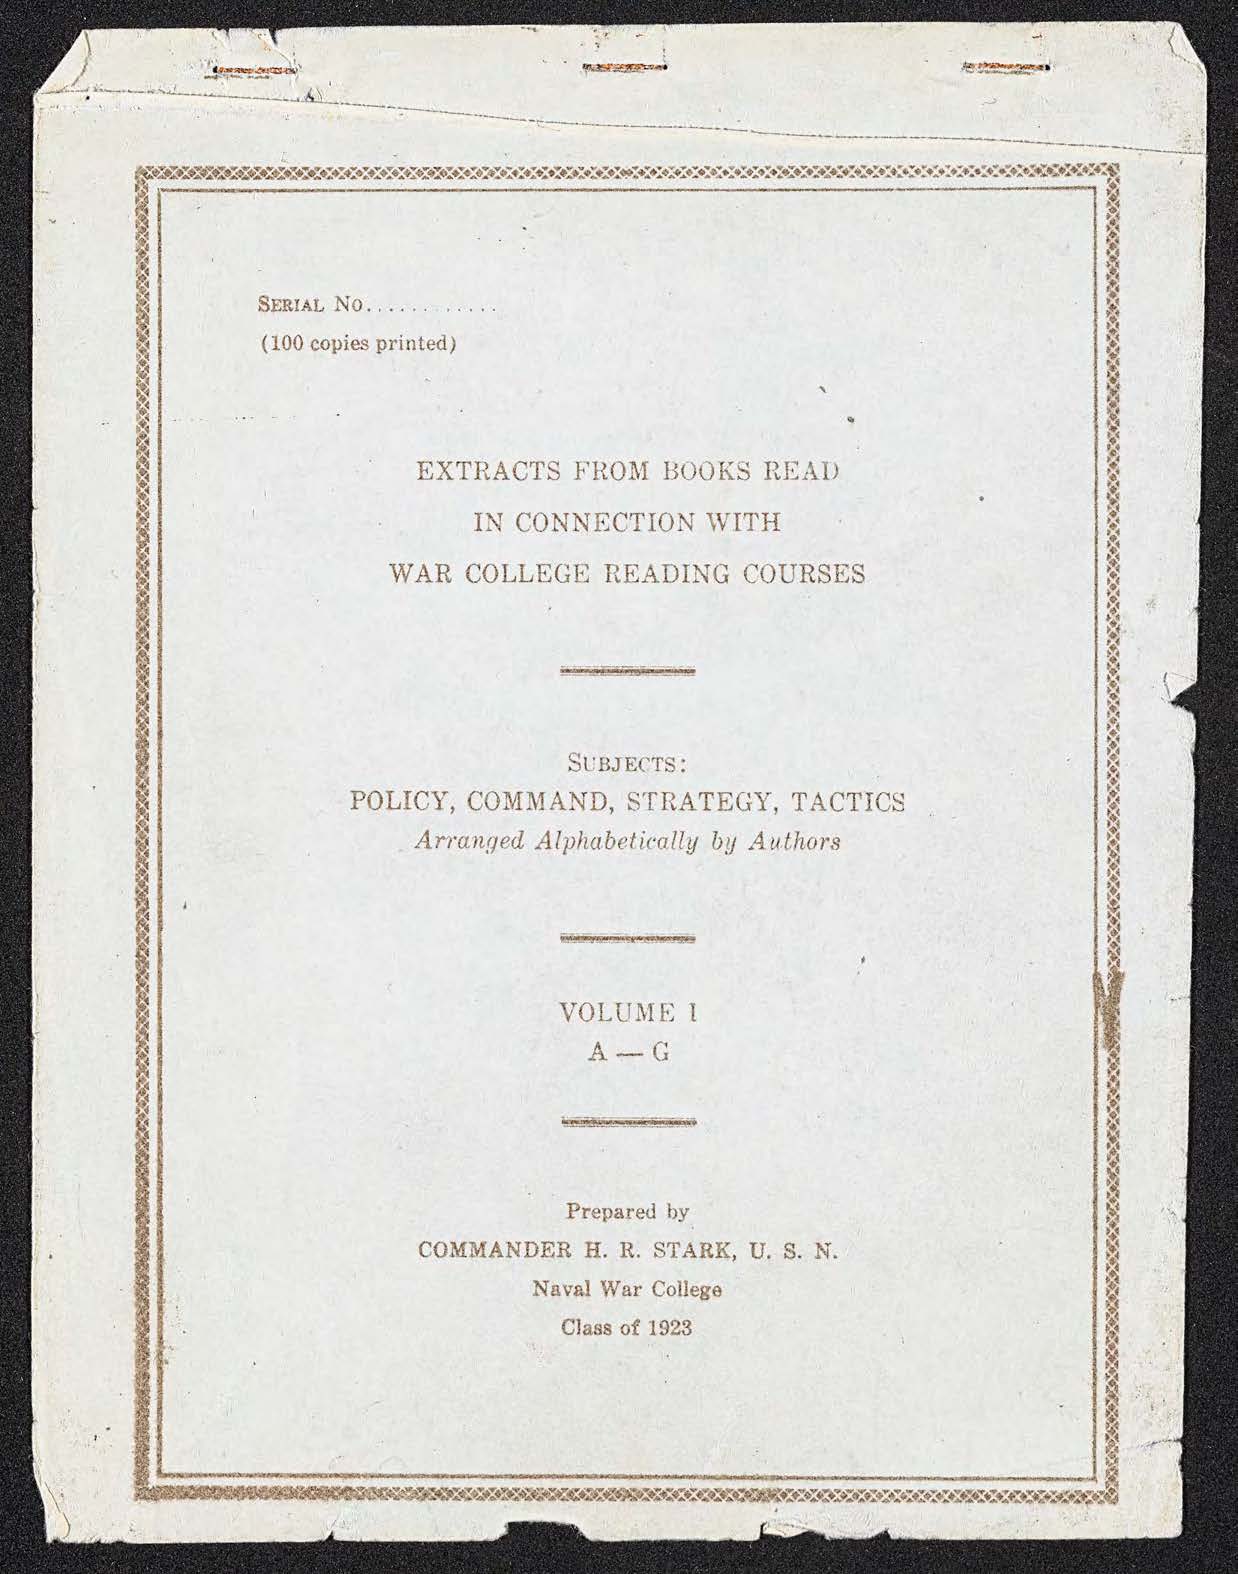 Extracts From Books Read in Connection with War College Reading Courses, Volume 1, A-G, Harold R. Stark